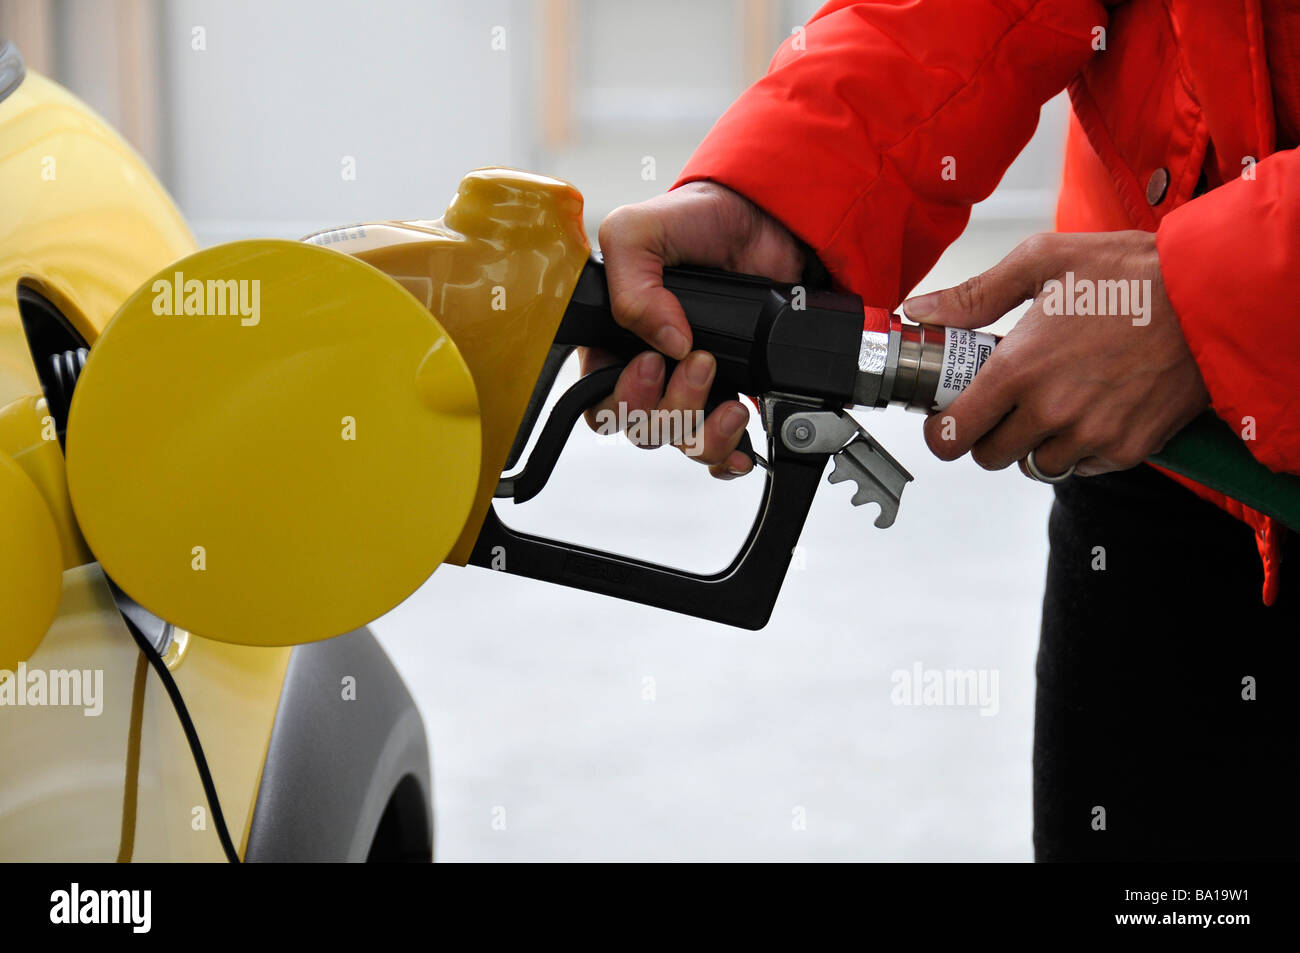 Woman pumping gas into her car Stock Photo